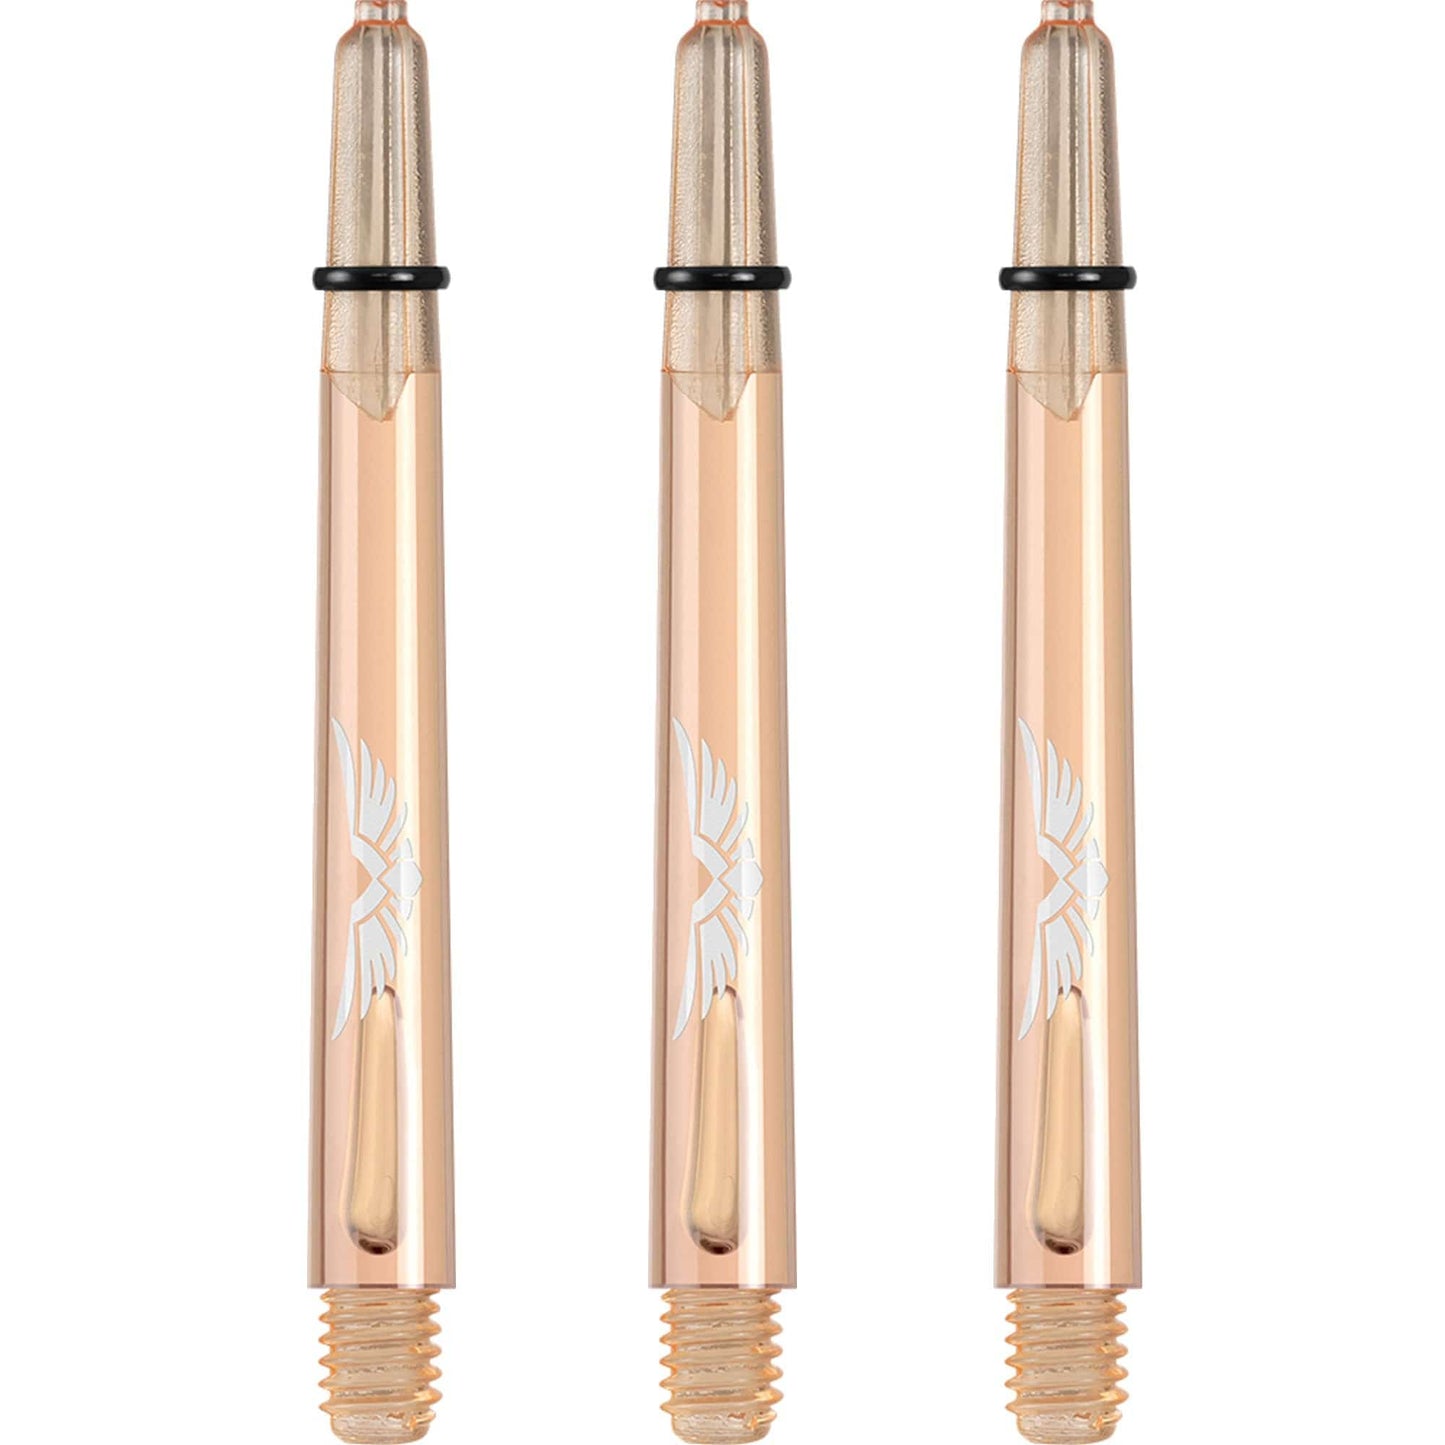 Shot Eagle Claw Dart Shafts - with Machined Rings - Strong Polycarbonate Stems - Copper Orange Medium